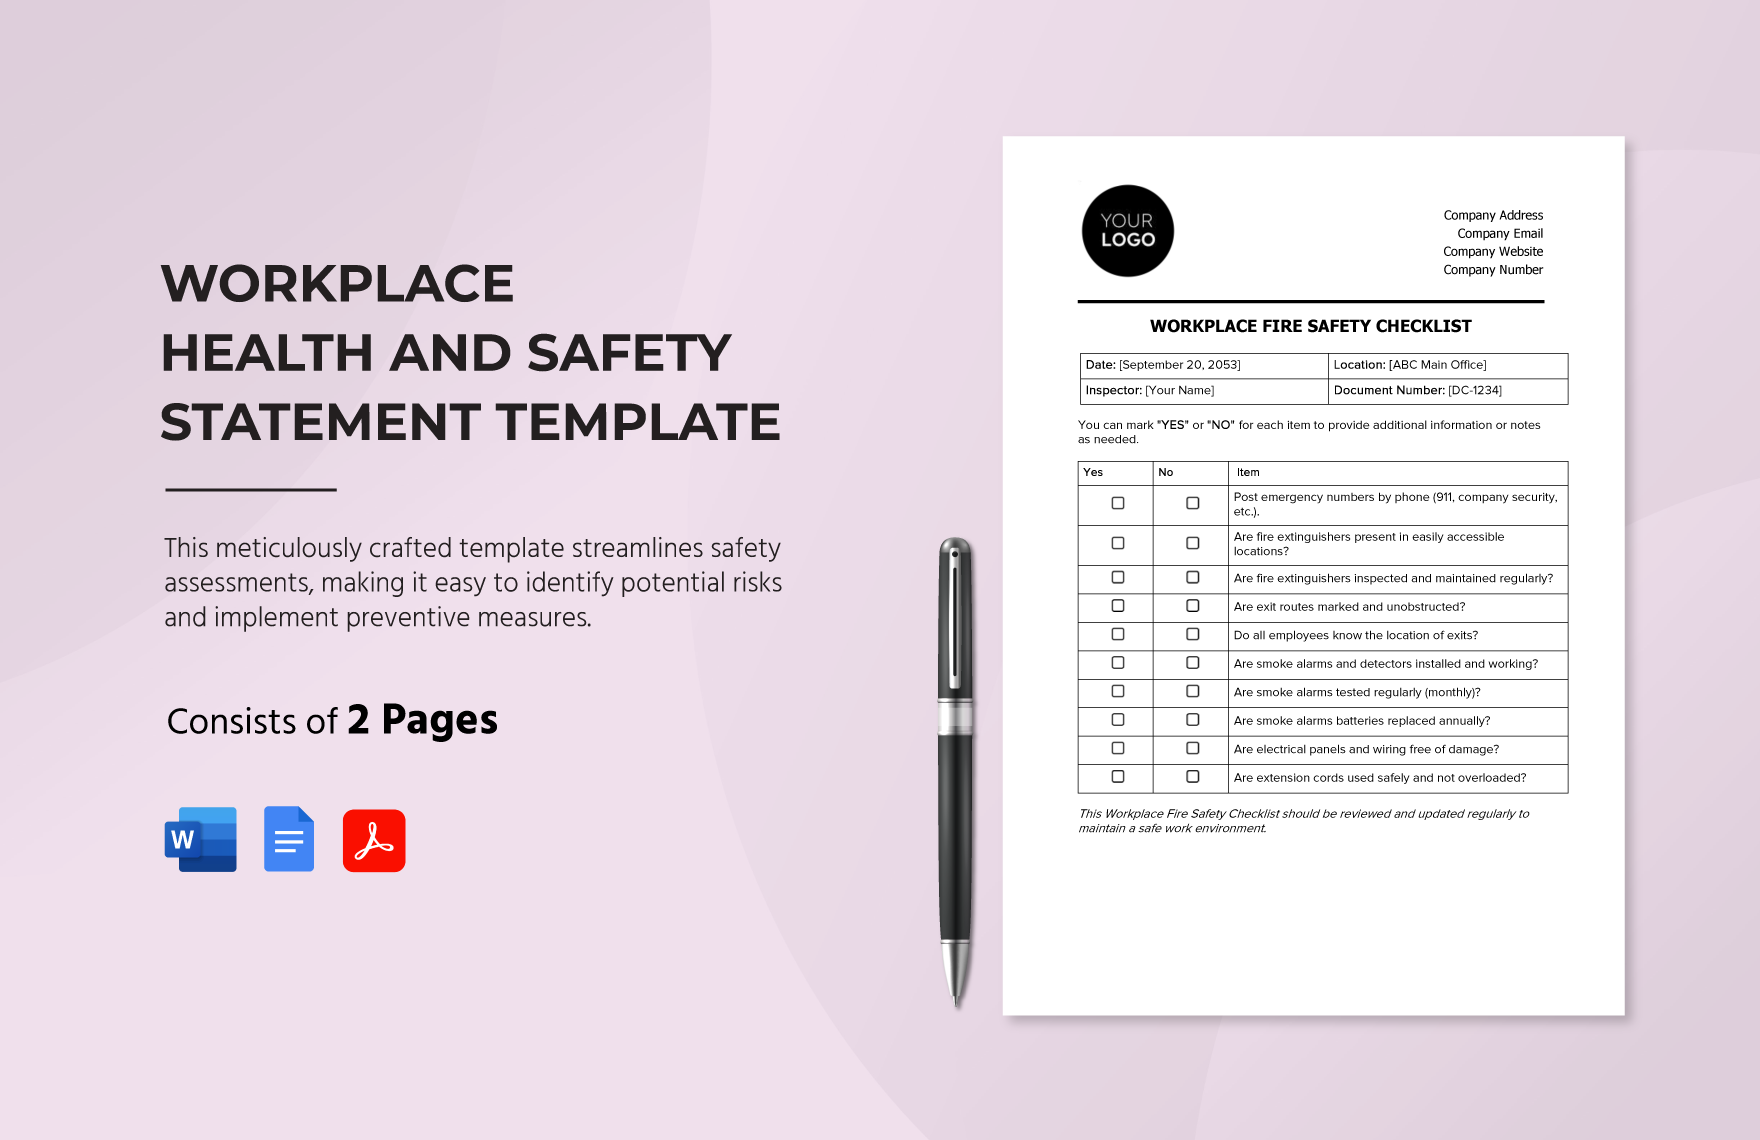 Workplace Health and Safety Statement Template